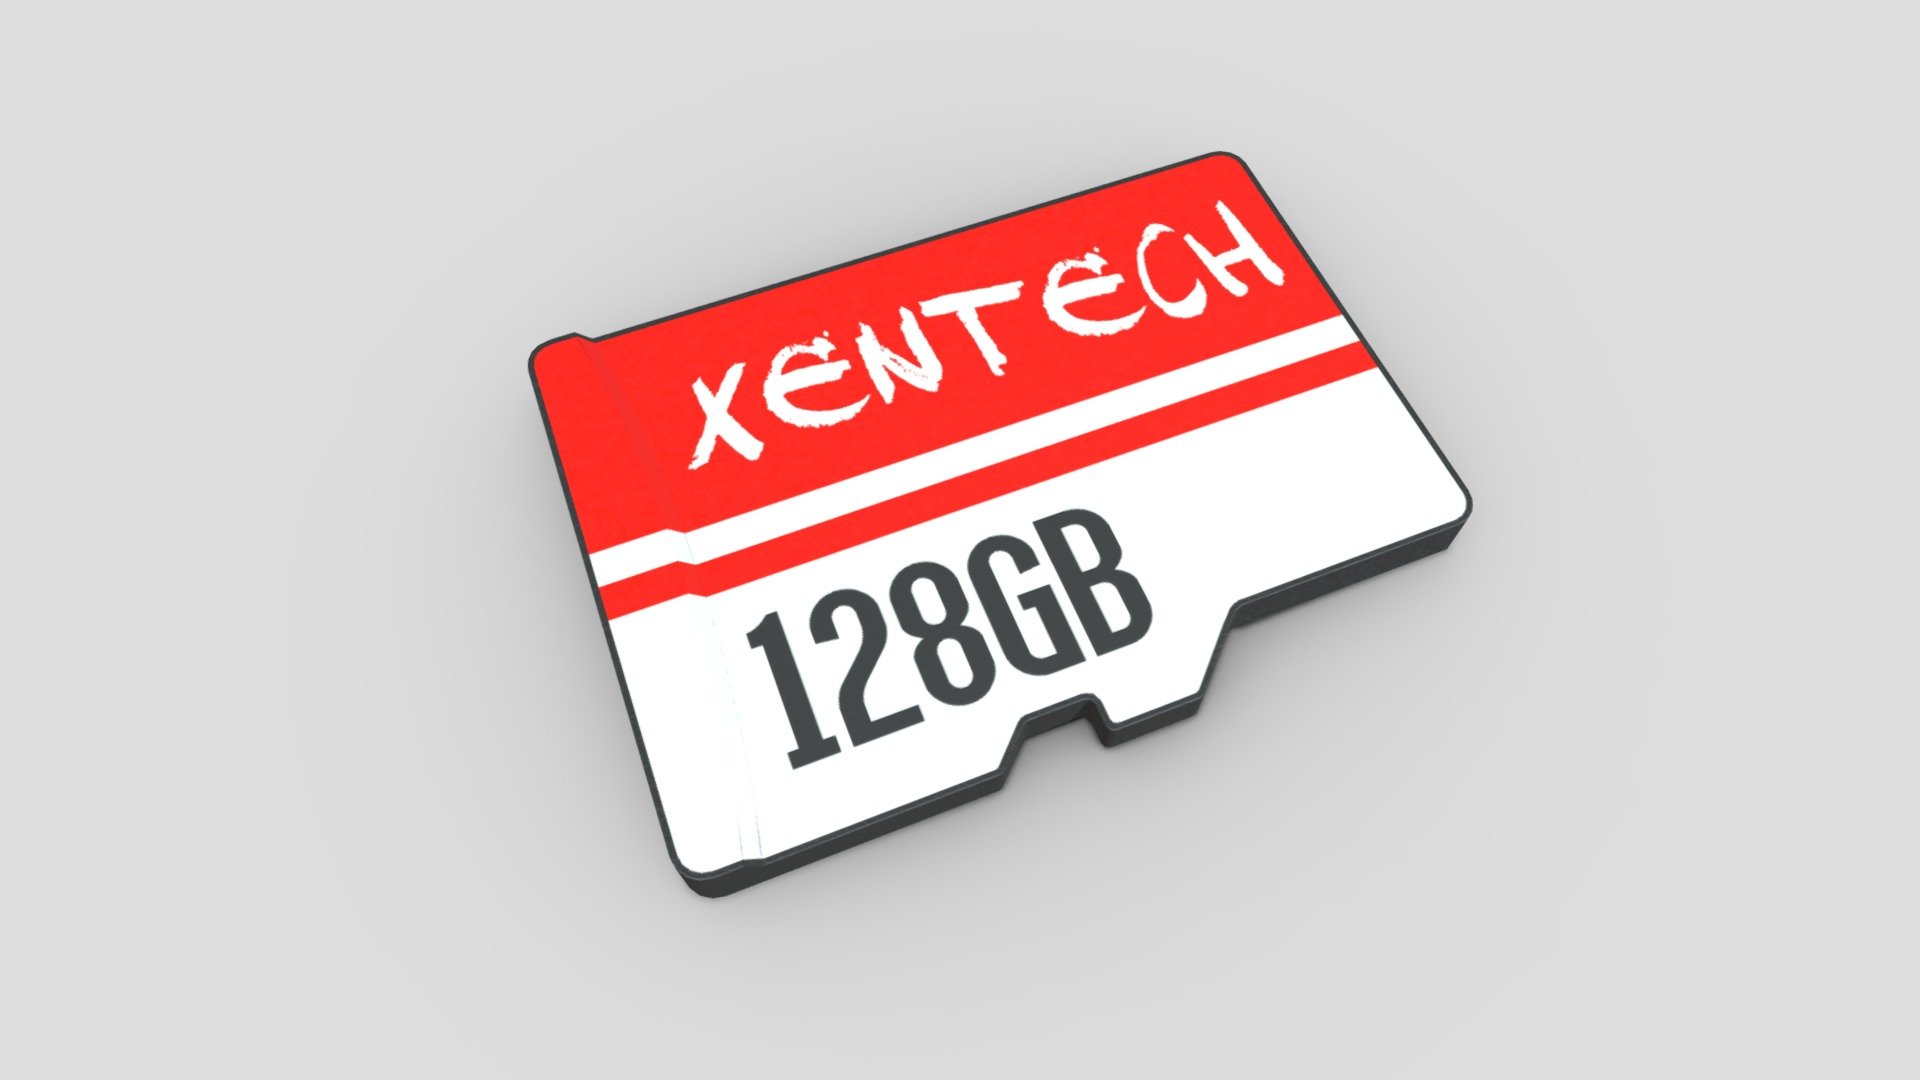 A high quality model of a Micro SD memory card.

The downloadable zip file contains the original file (Blender) with packed textures, as well as OBJ and FBX 3d model